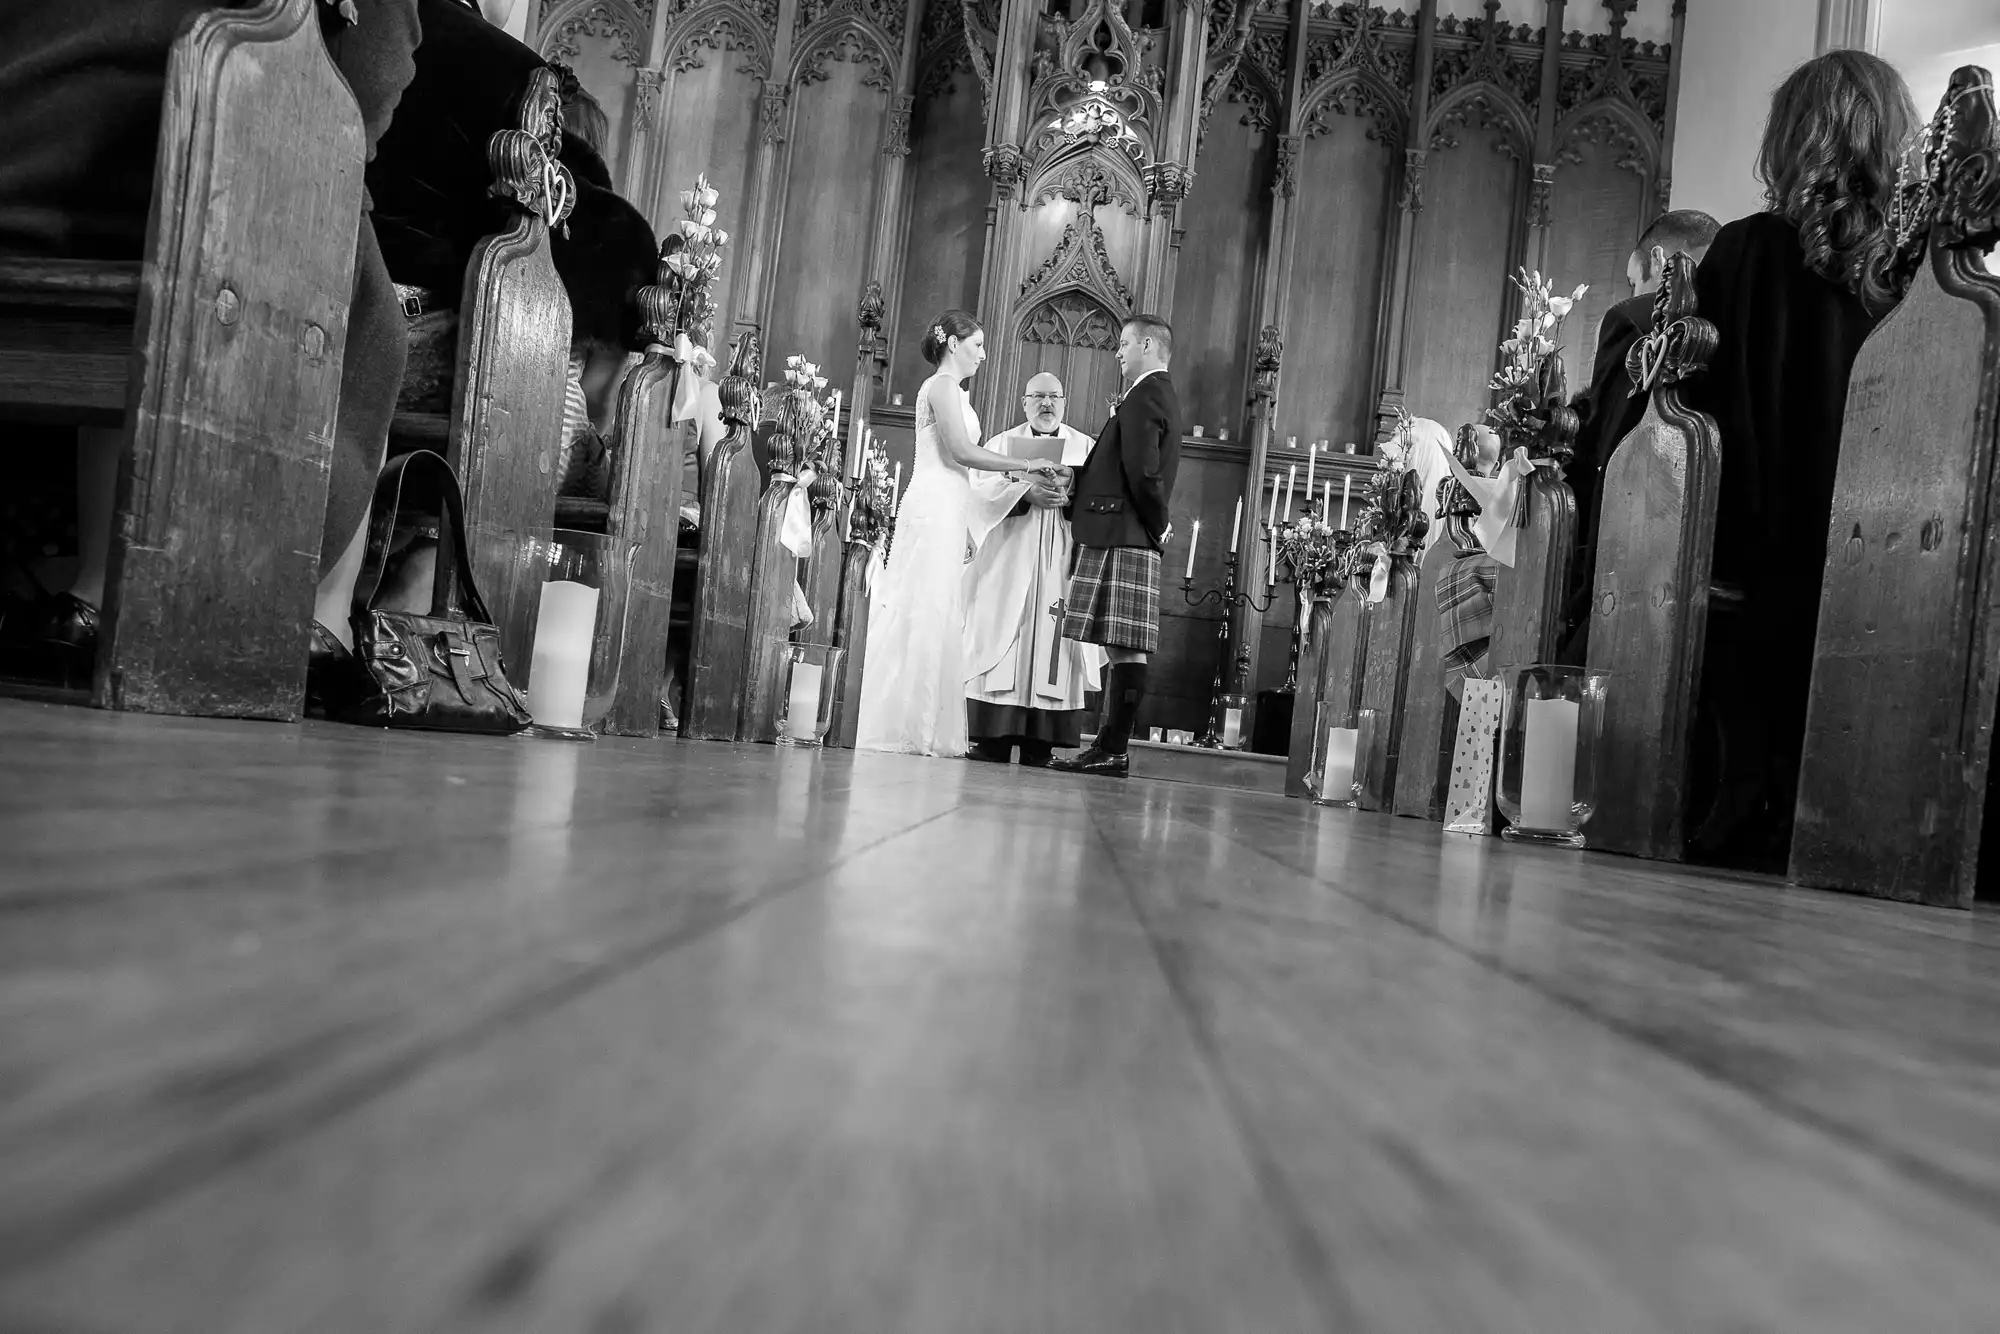 A bride and groom standing at the altar with a priest during a wedding ceremony, viewed from a low angle between wooden pews in a church.